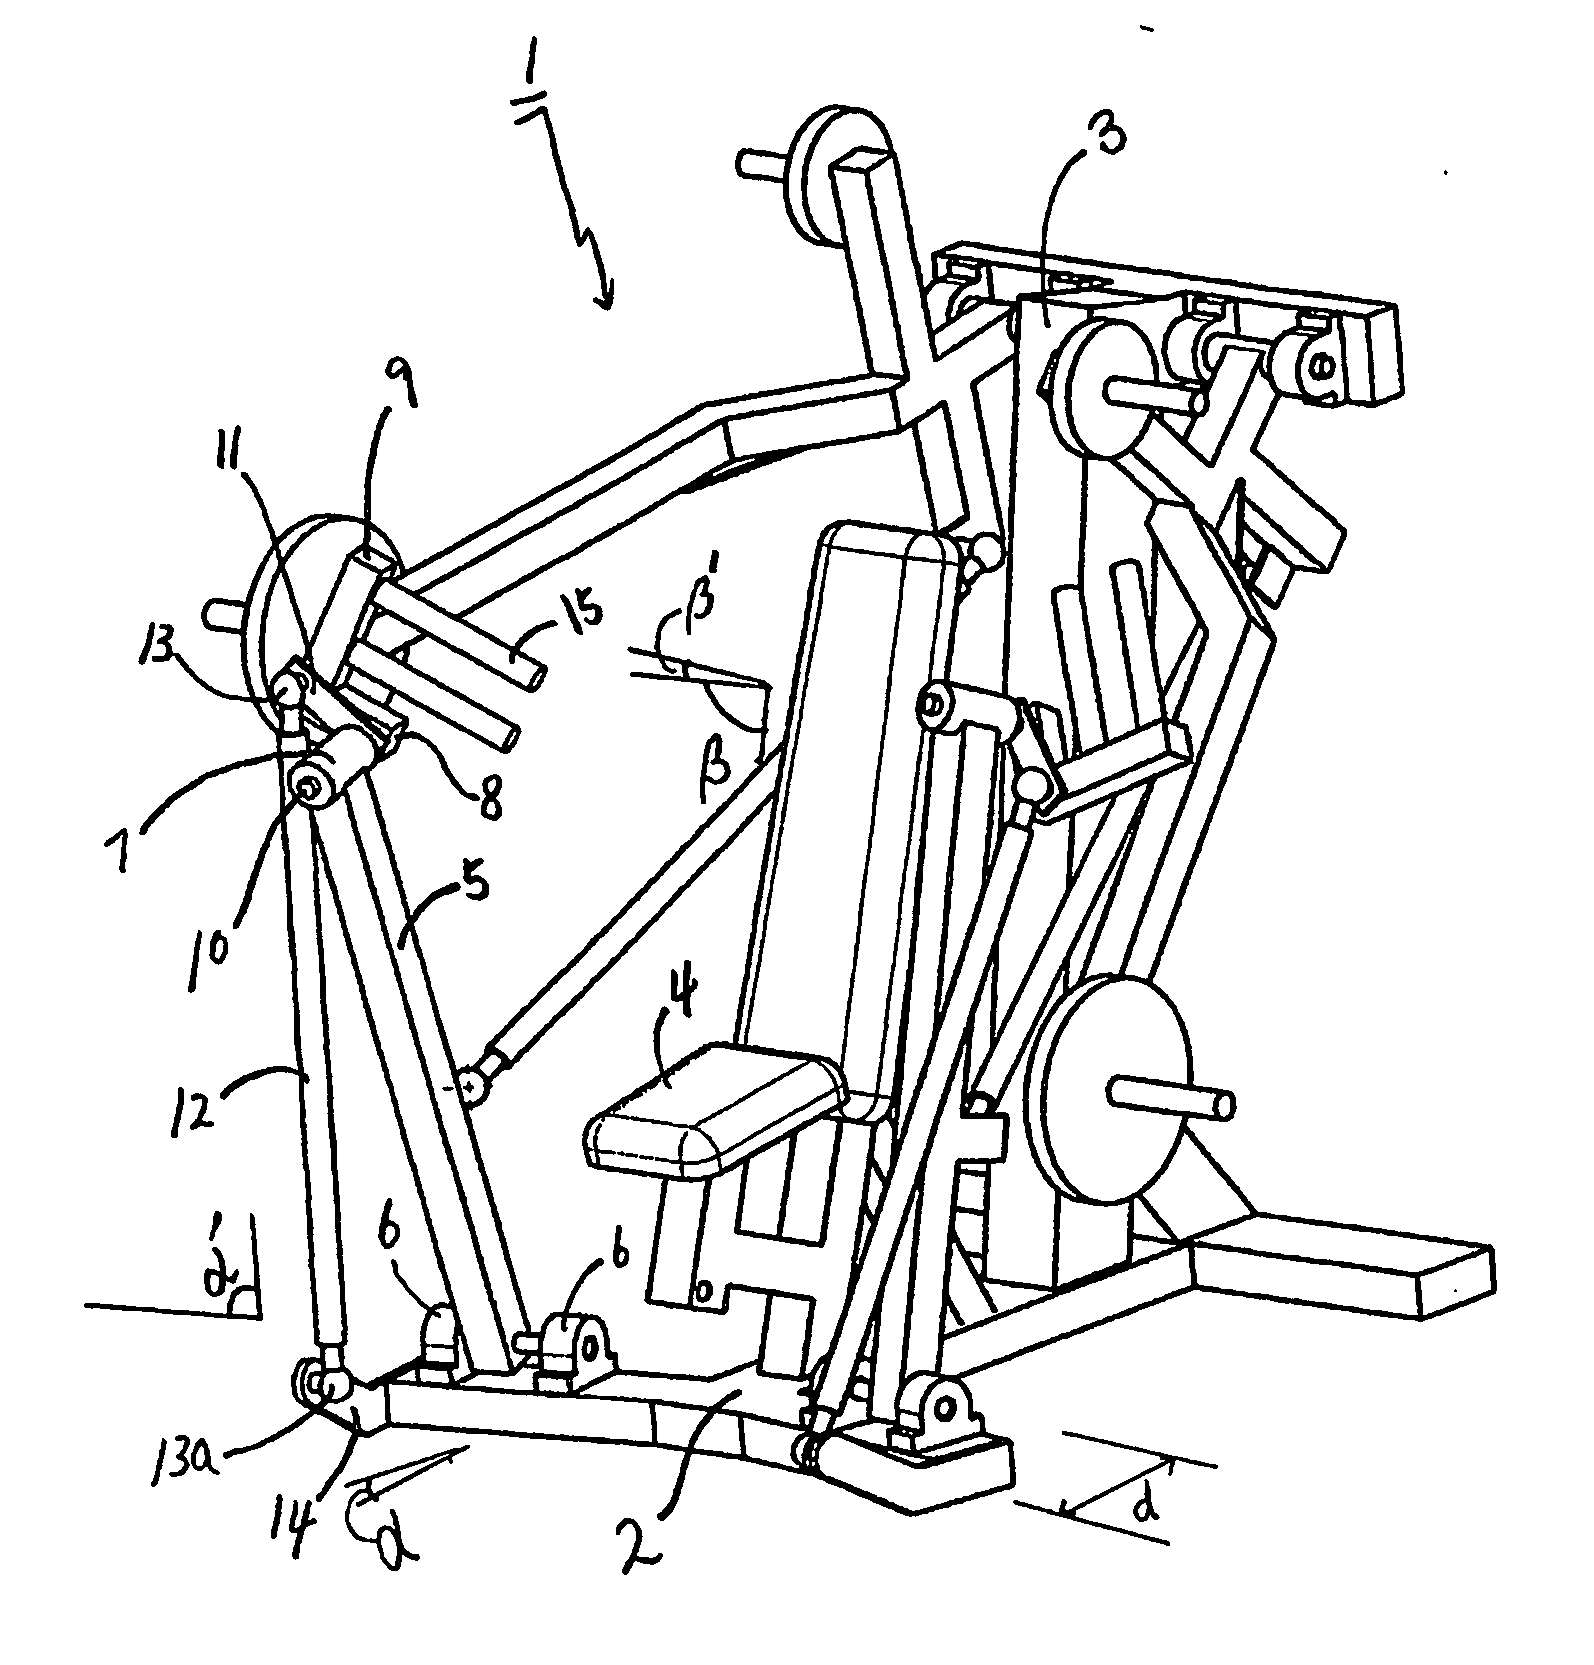 Apparatus for three-dimensional anaerobic exercise